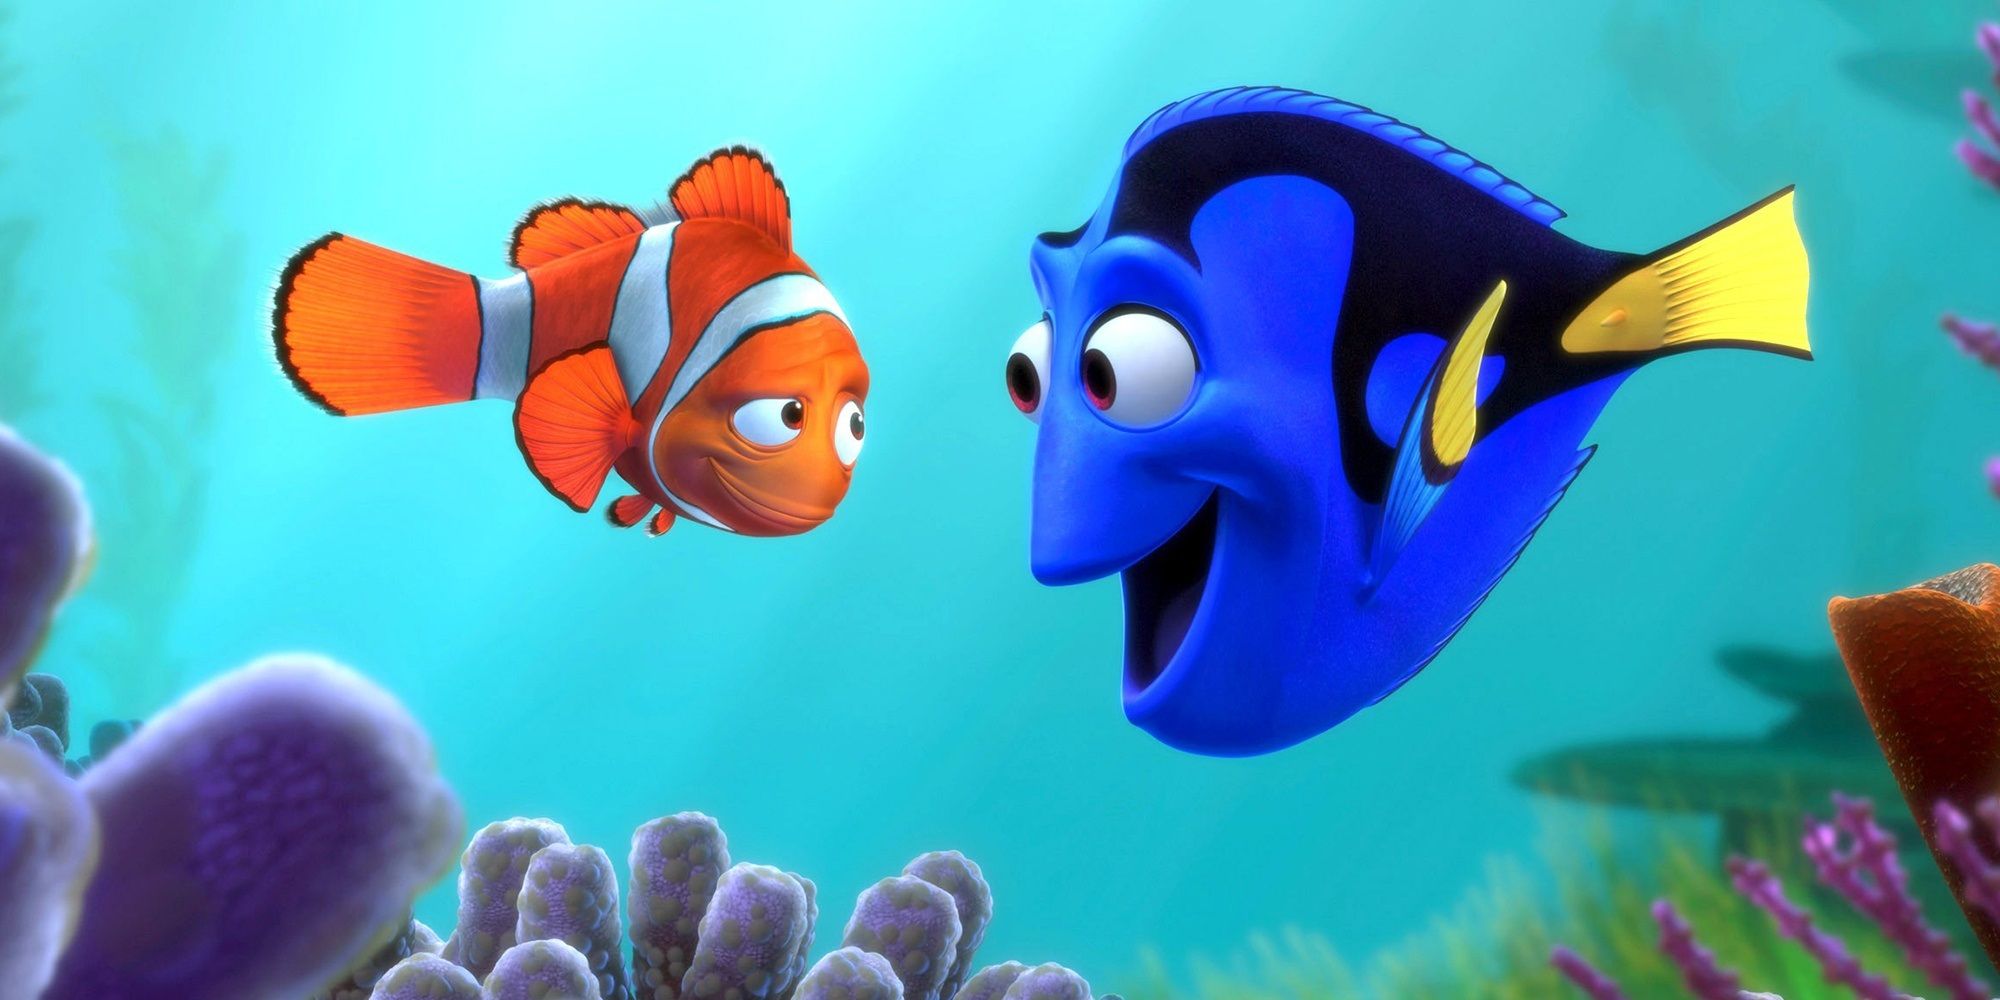 Finding Nemo - Marlin and Dory looking at each other